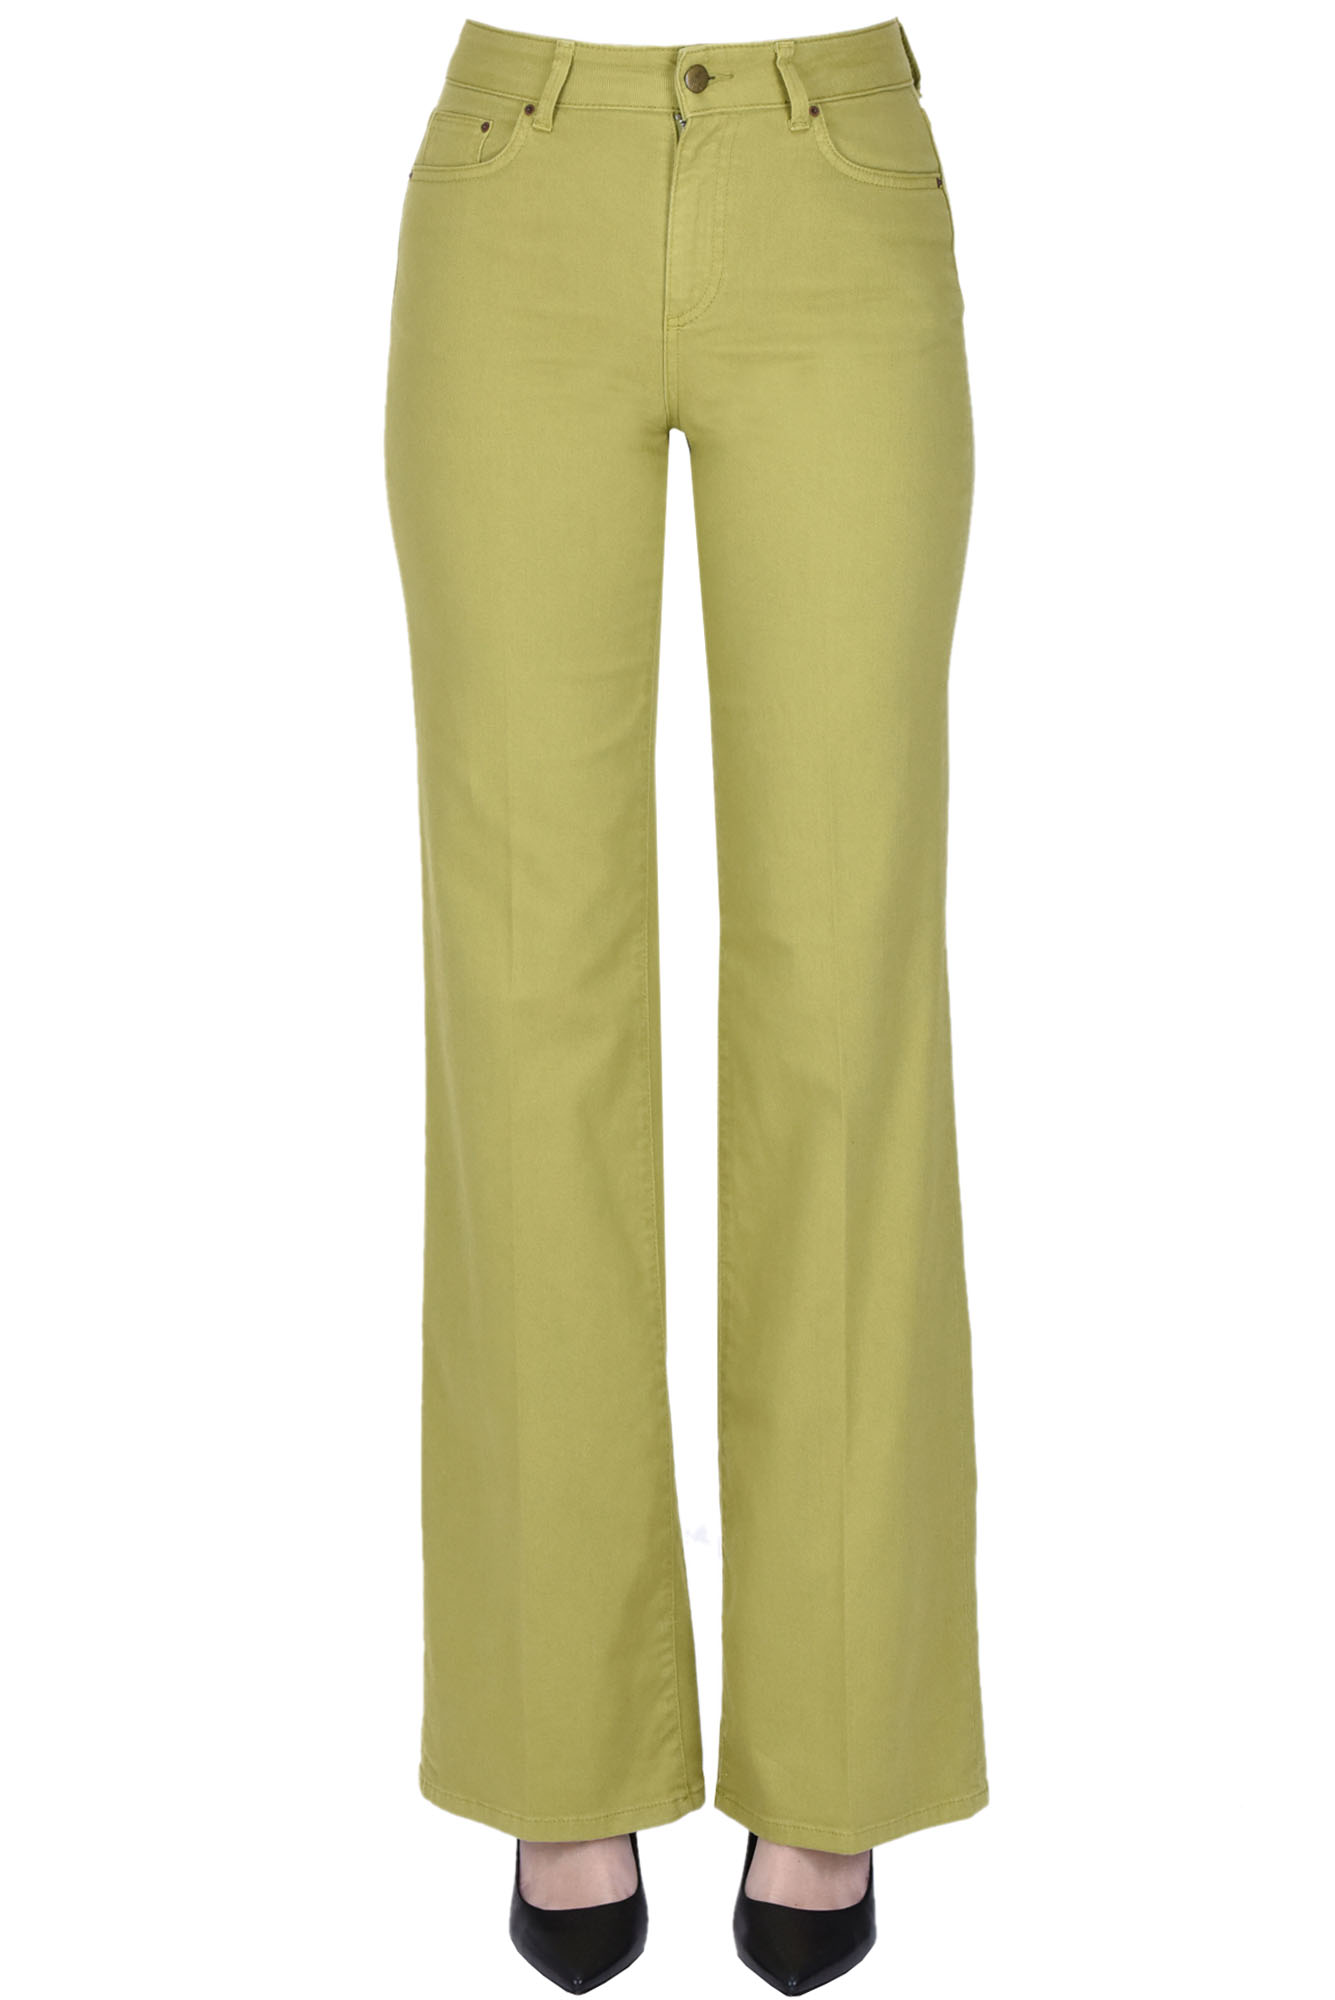 Shop Ps. Don't Forget Me Letizia Jeans In Lime